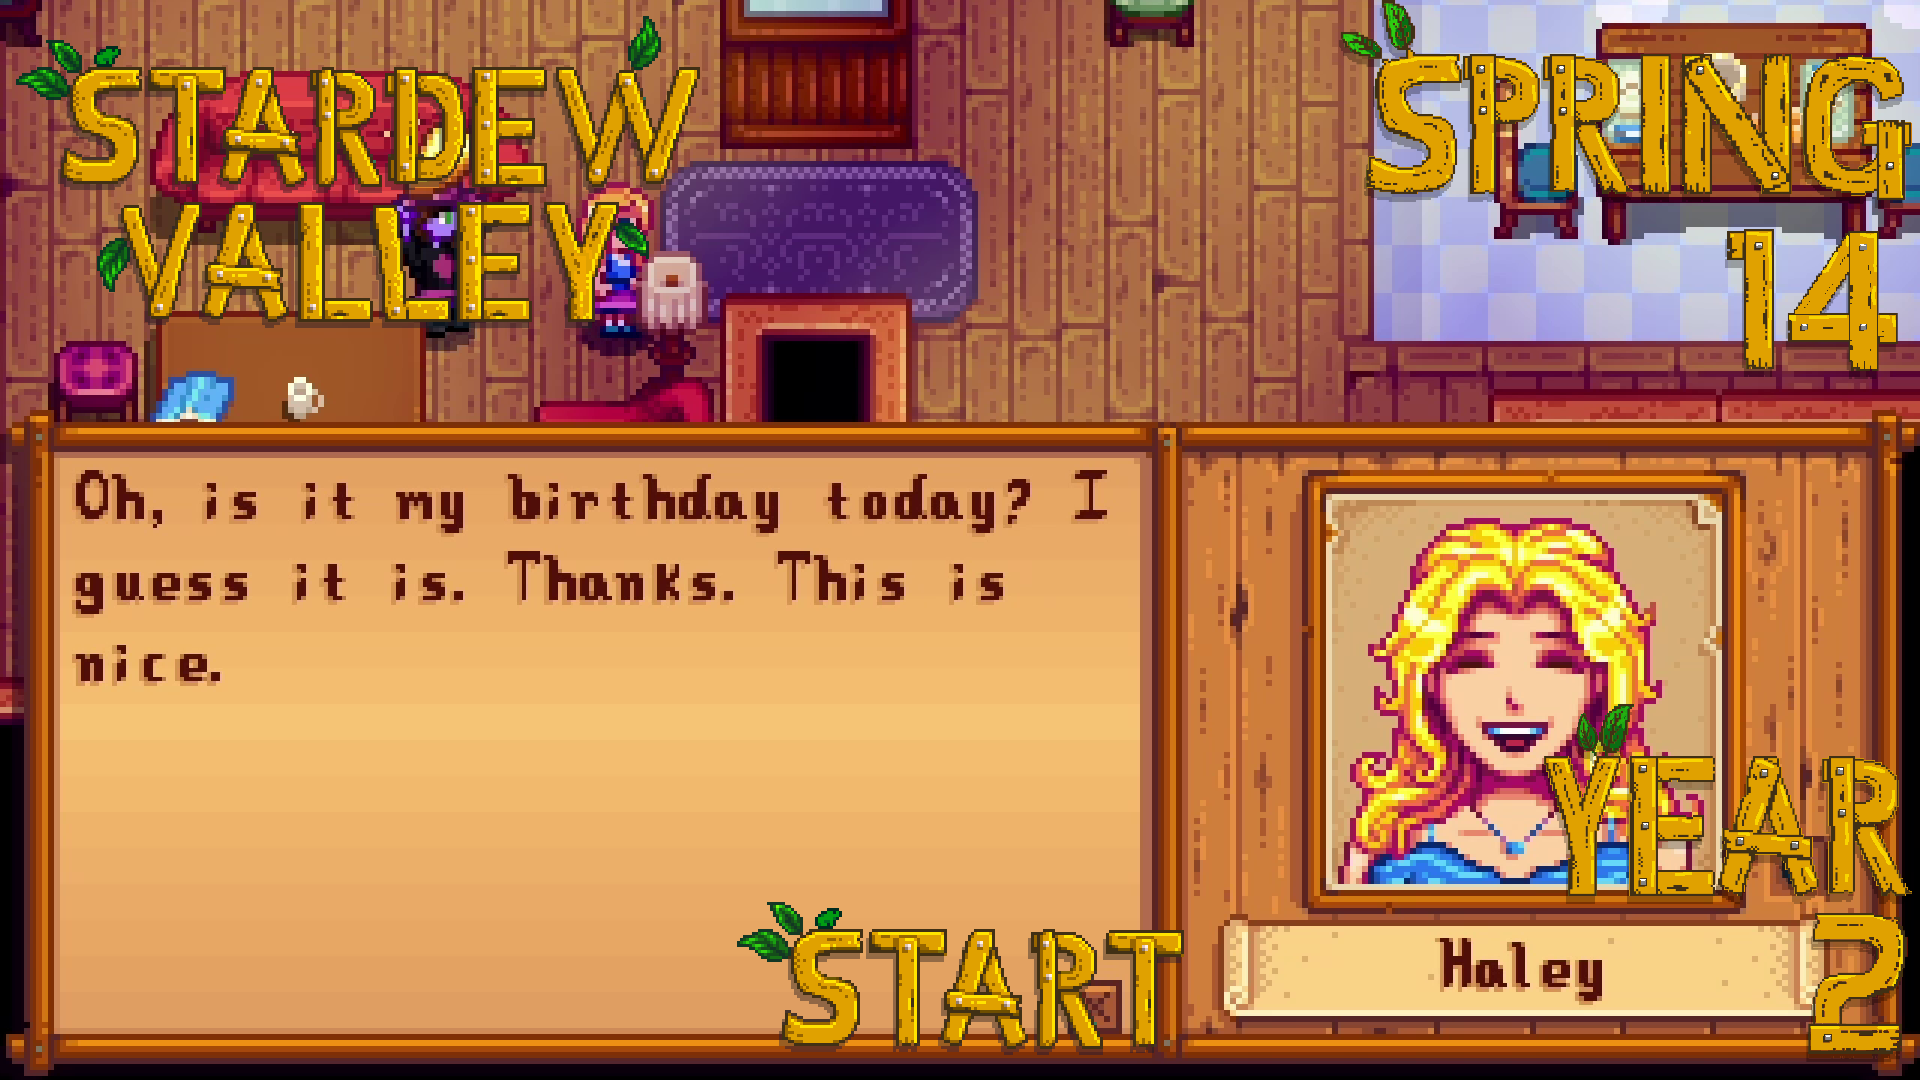 The Blues That You Get On The Day After Egg Day – Stardew Valley, Spring 14, Year 2, Start